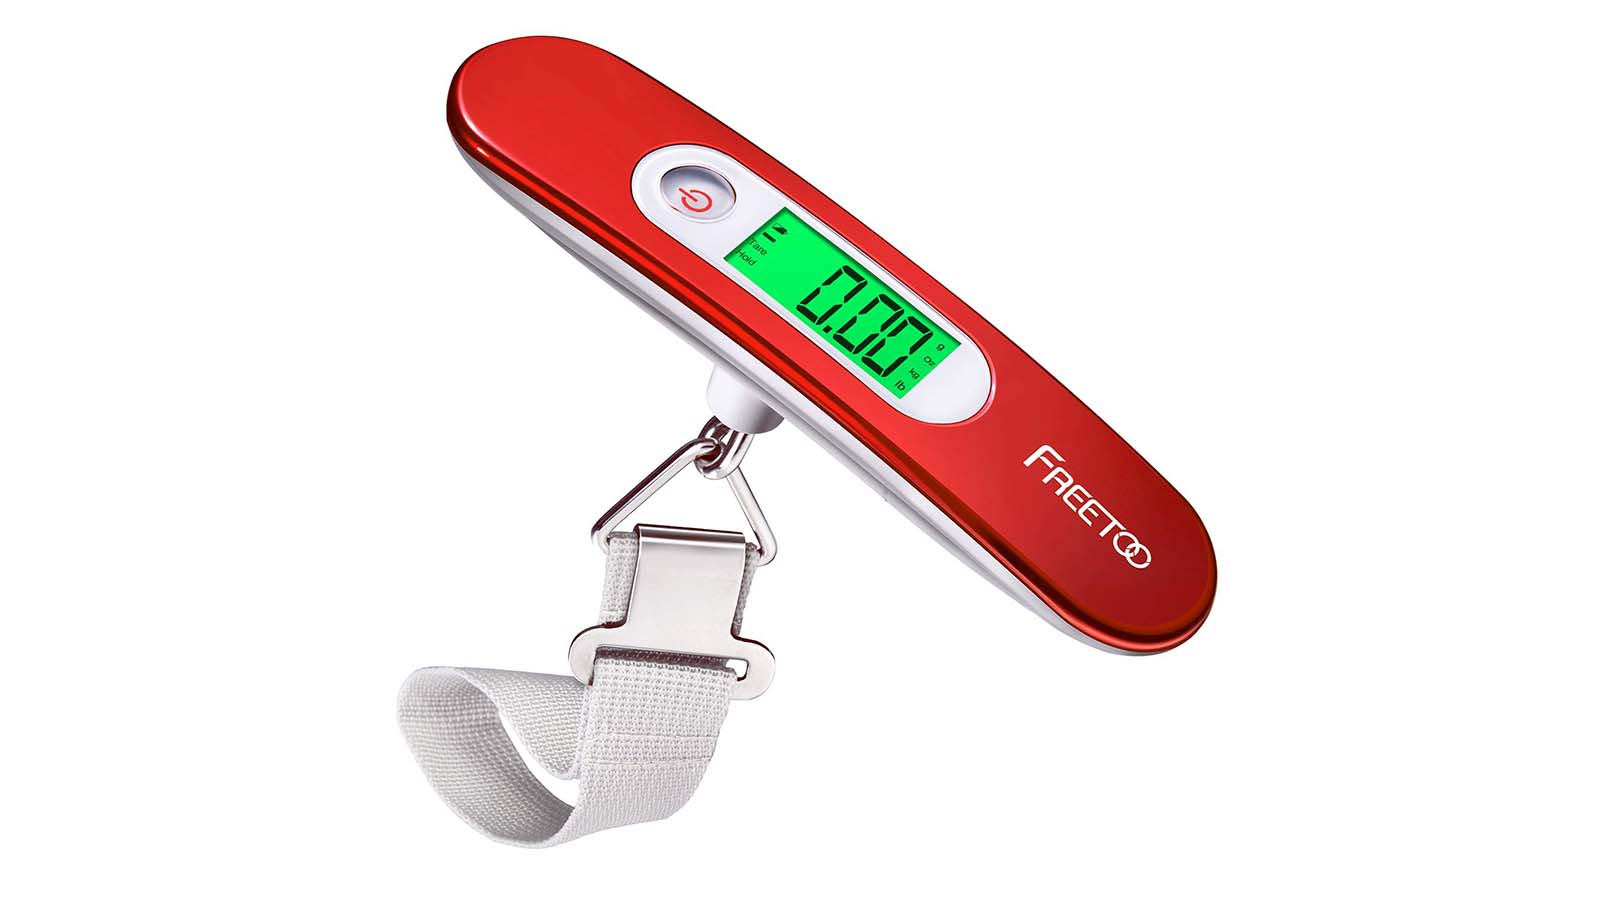 Best Luggage Scale To Help Avoid Baggage Fees